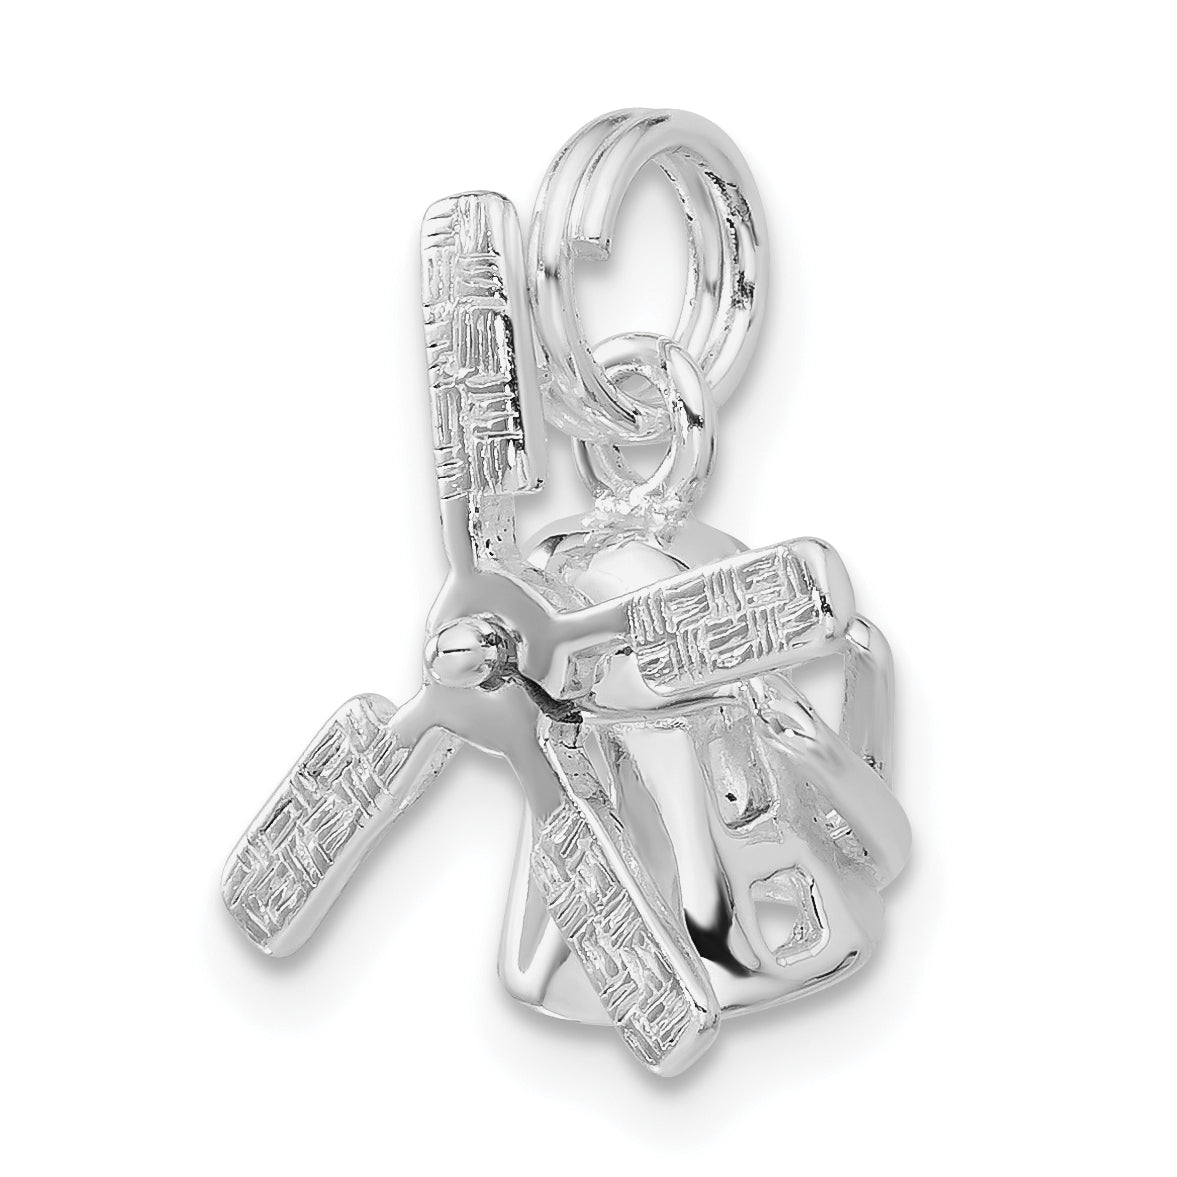 Sterling Silver Polished Windmill Charm